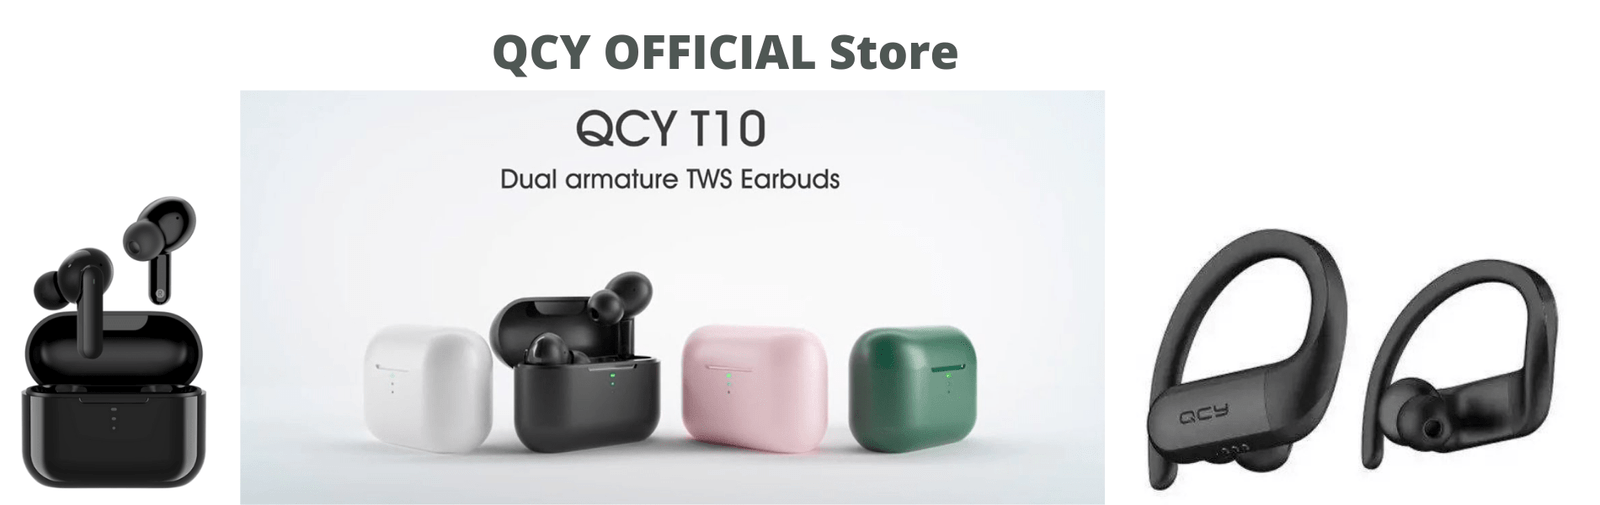 QCY OFFICIAL Store